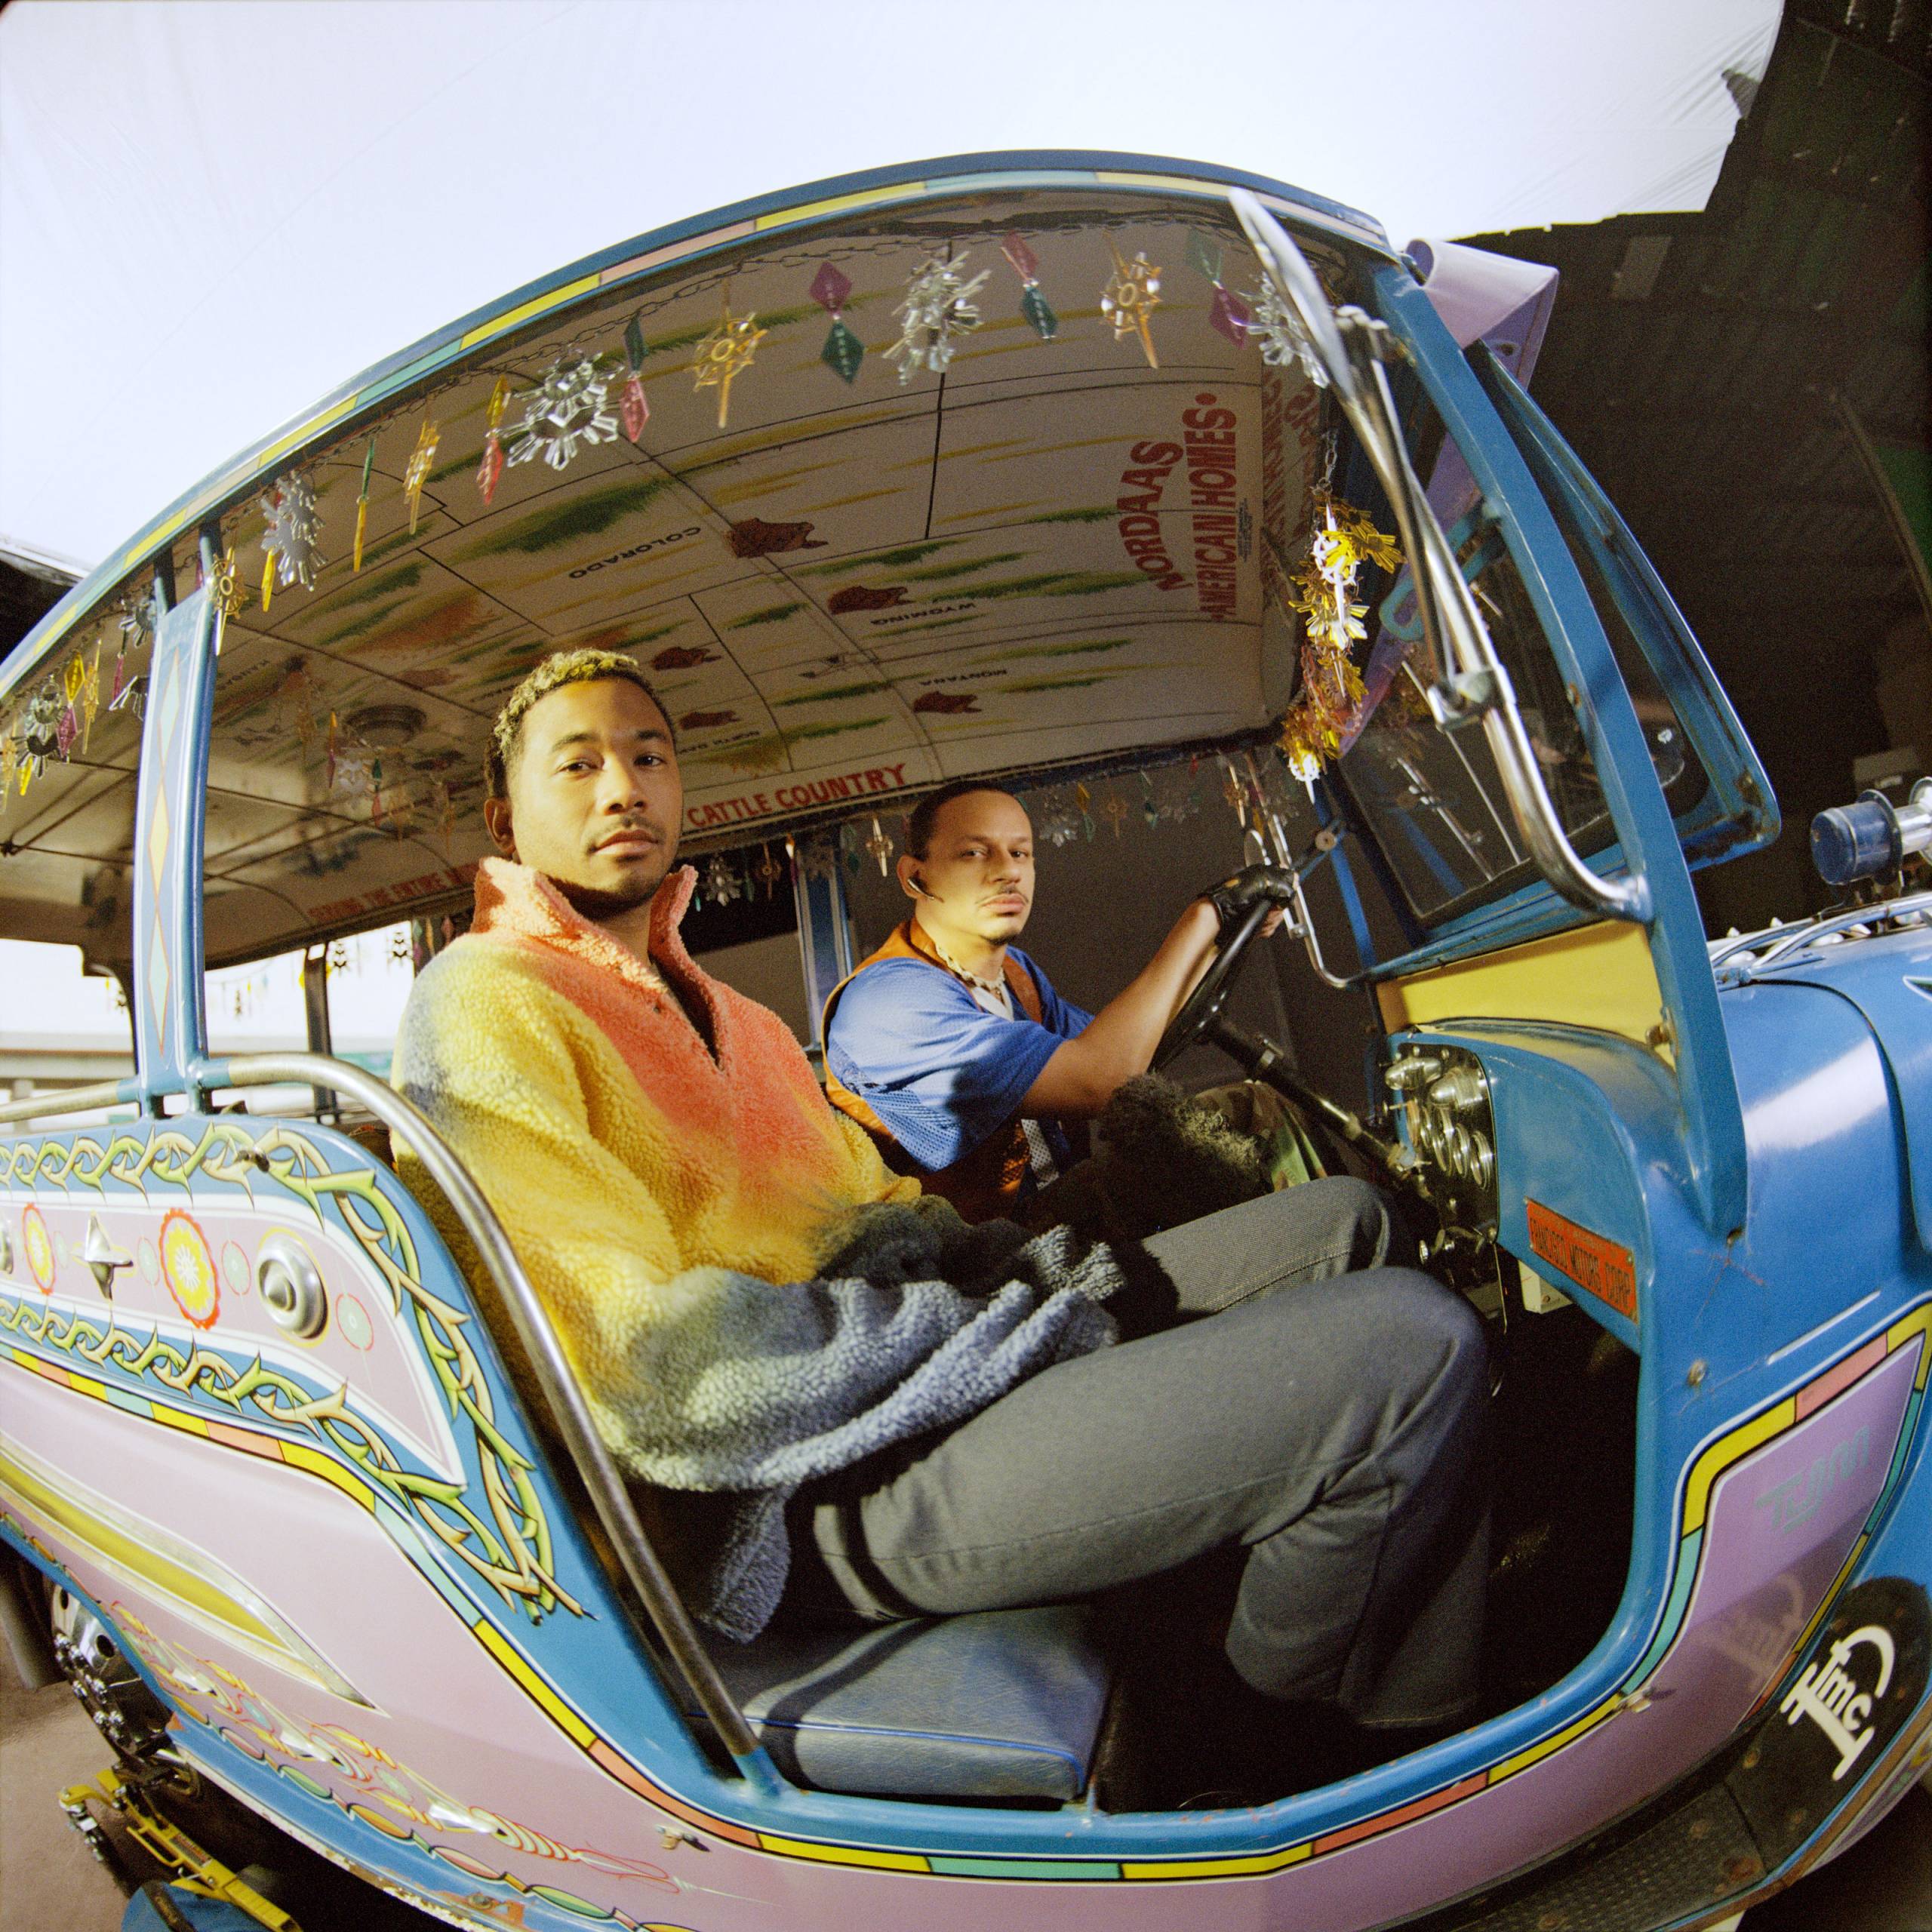 Two men in a decorated car, with a fisheye lens effect on the photo